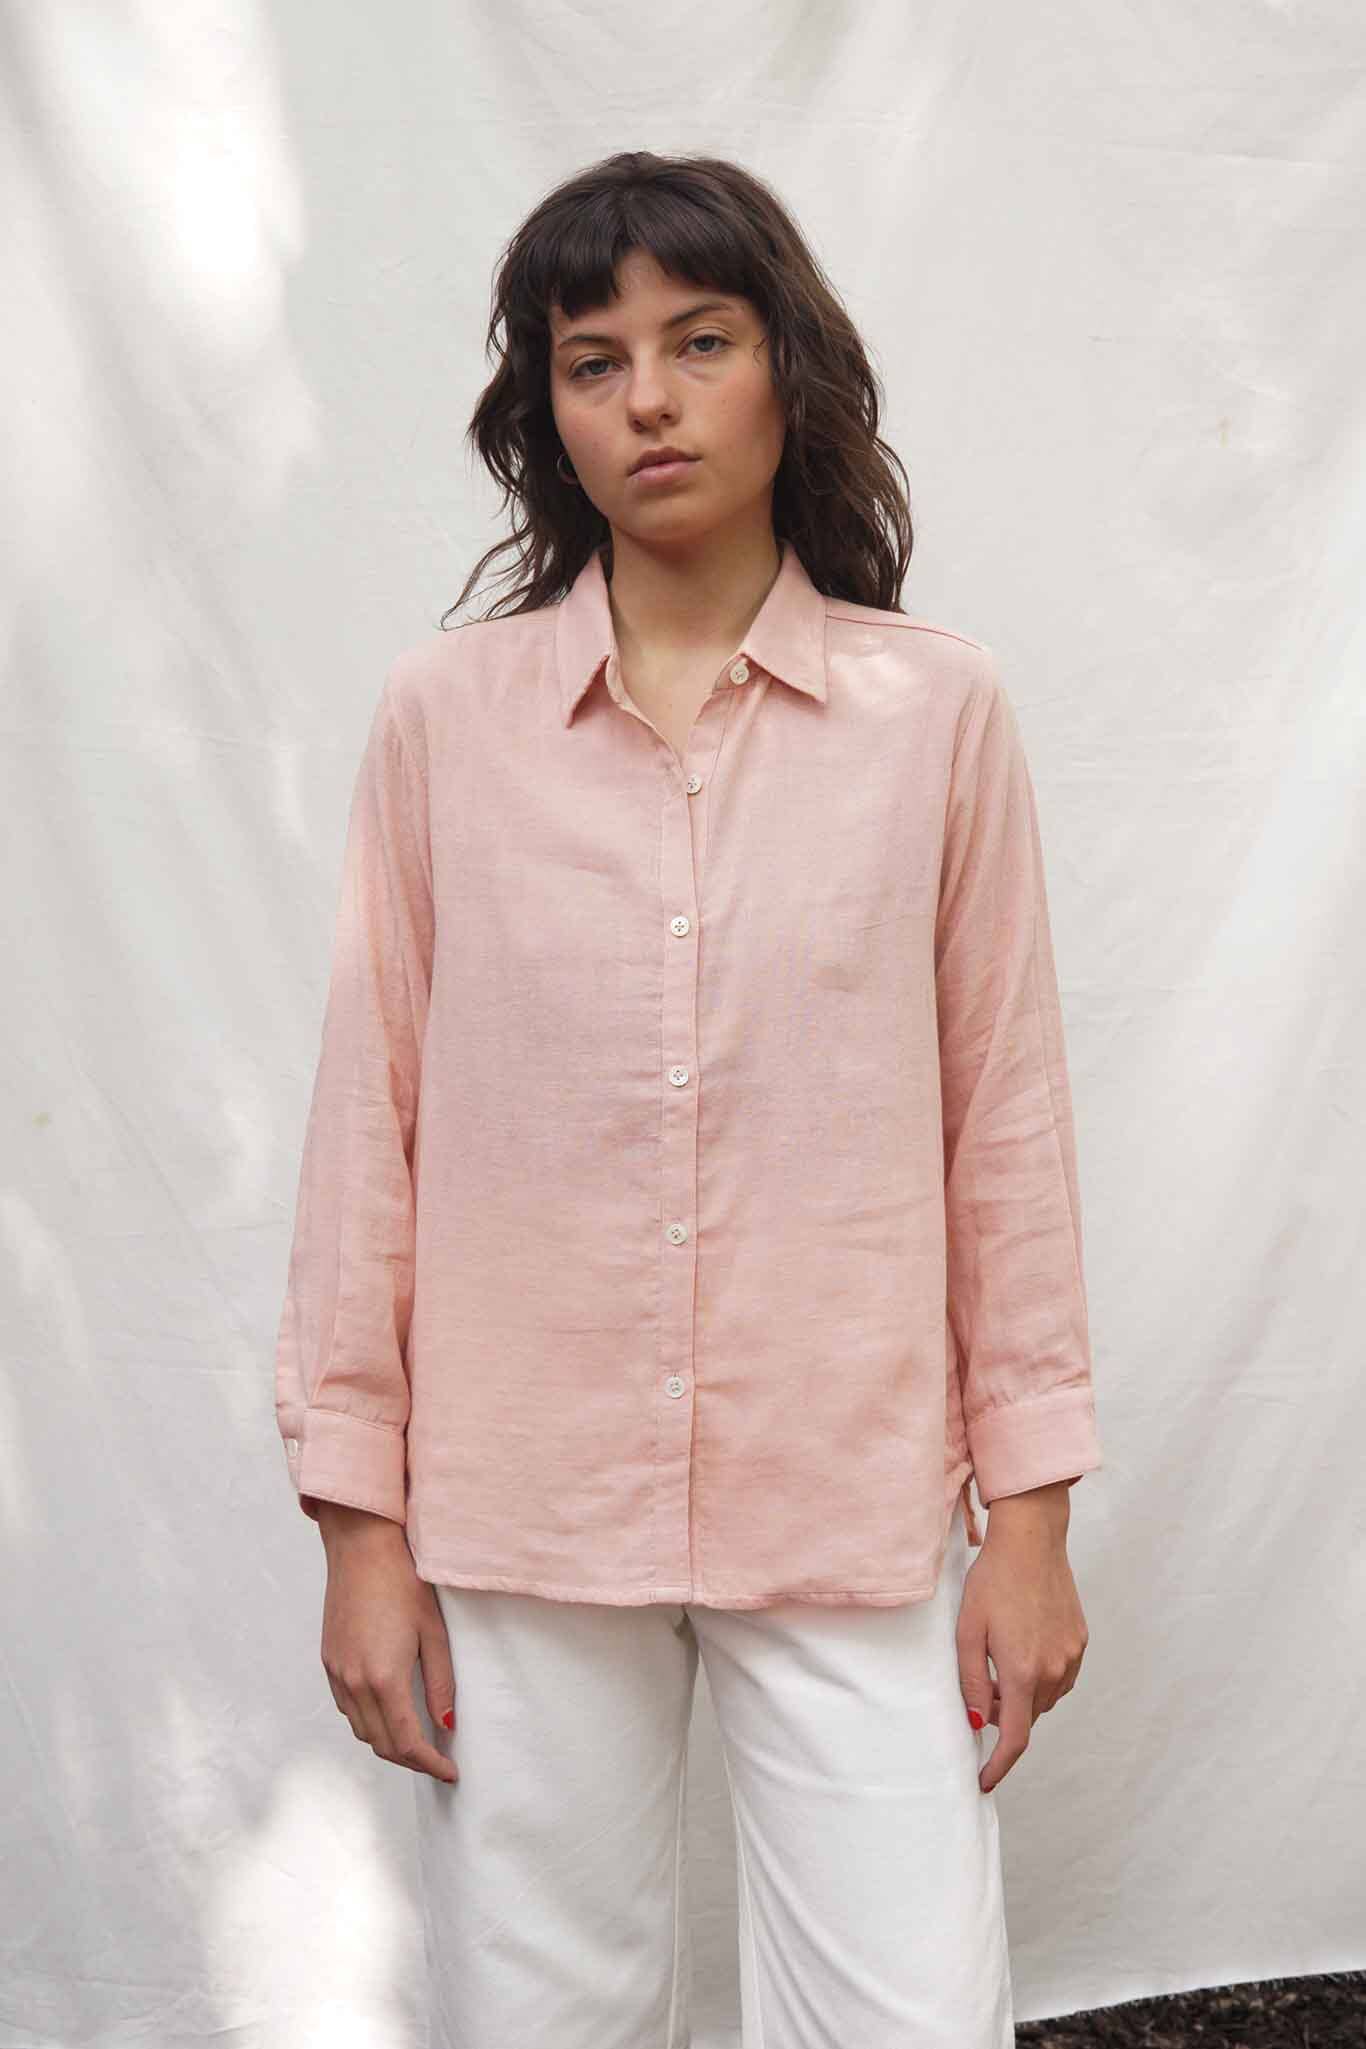 Cute summer button down shirt with collar and long sleeves.